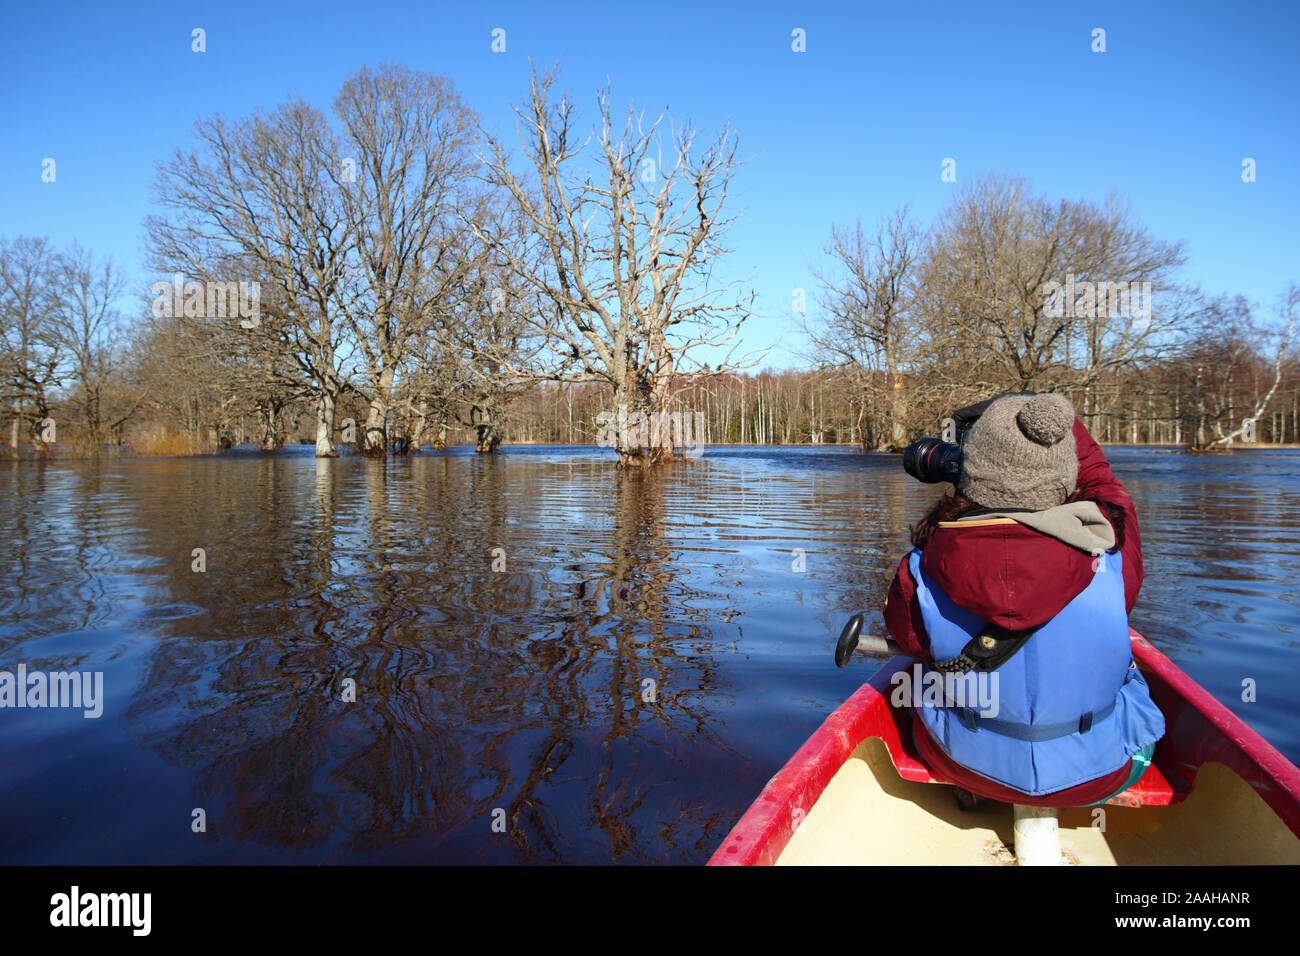 Fifth season canoeing trip in Soomaa National Park, woman on canoe taking a picture in flooded spring forest, Estonia Stock Photo